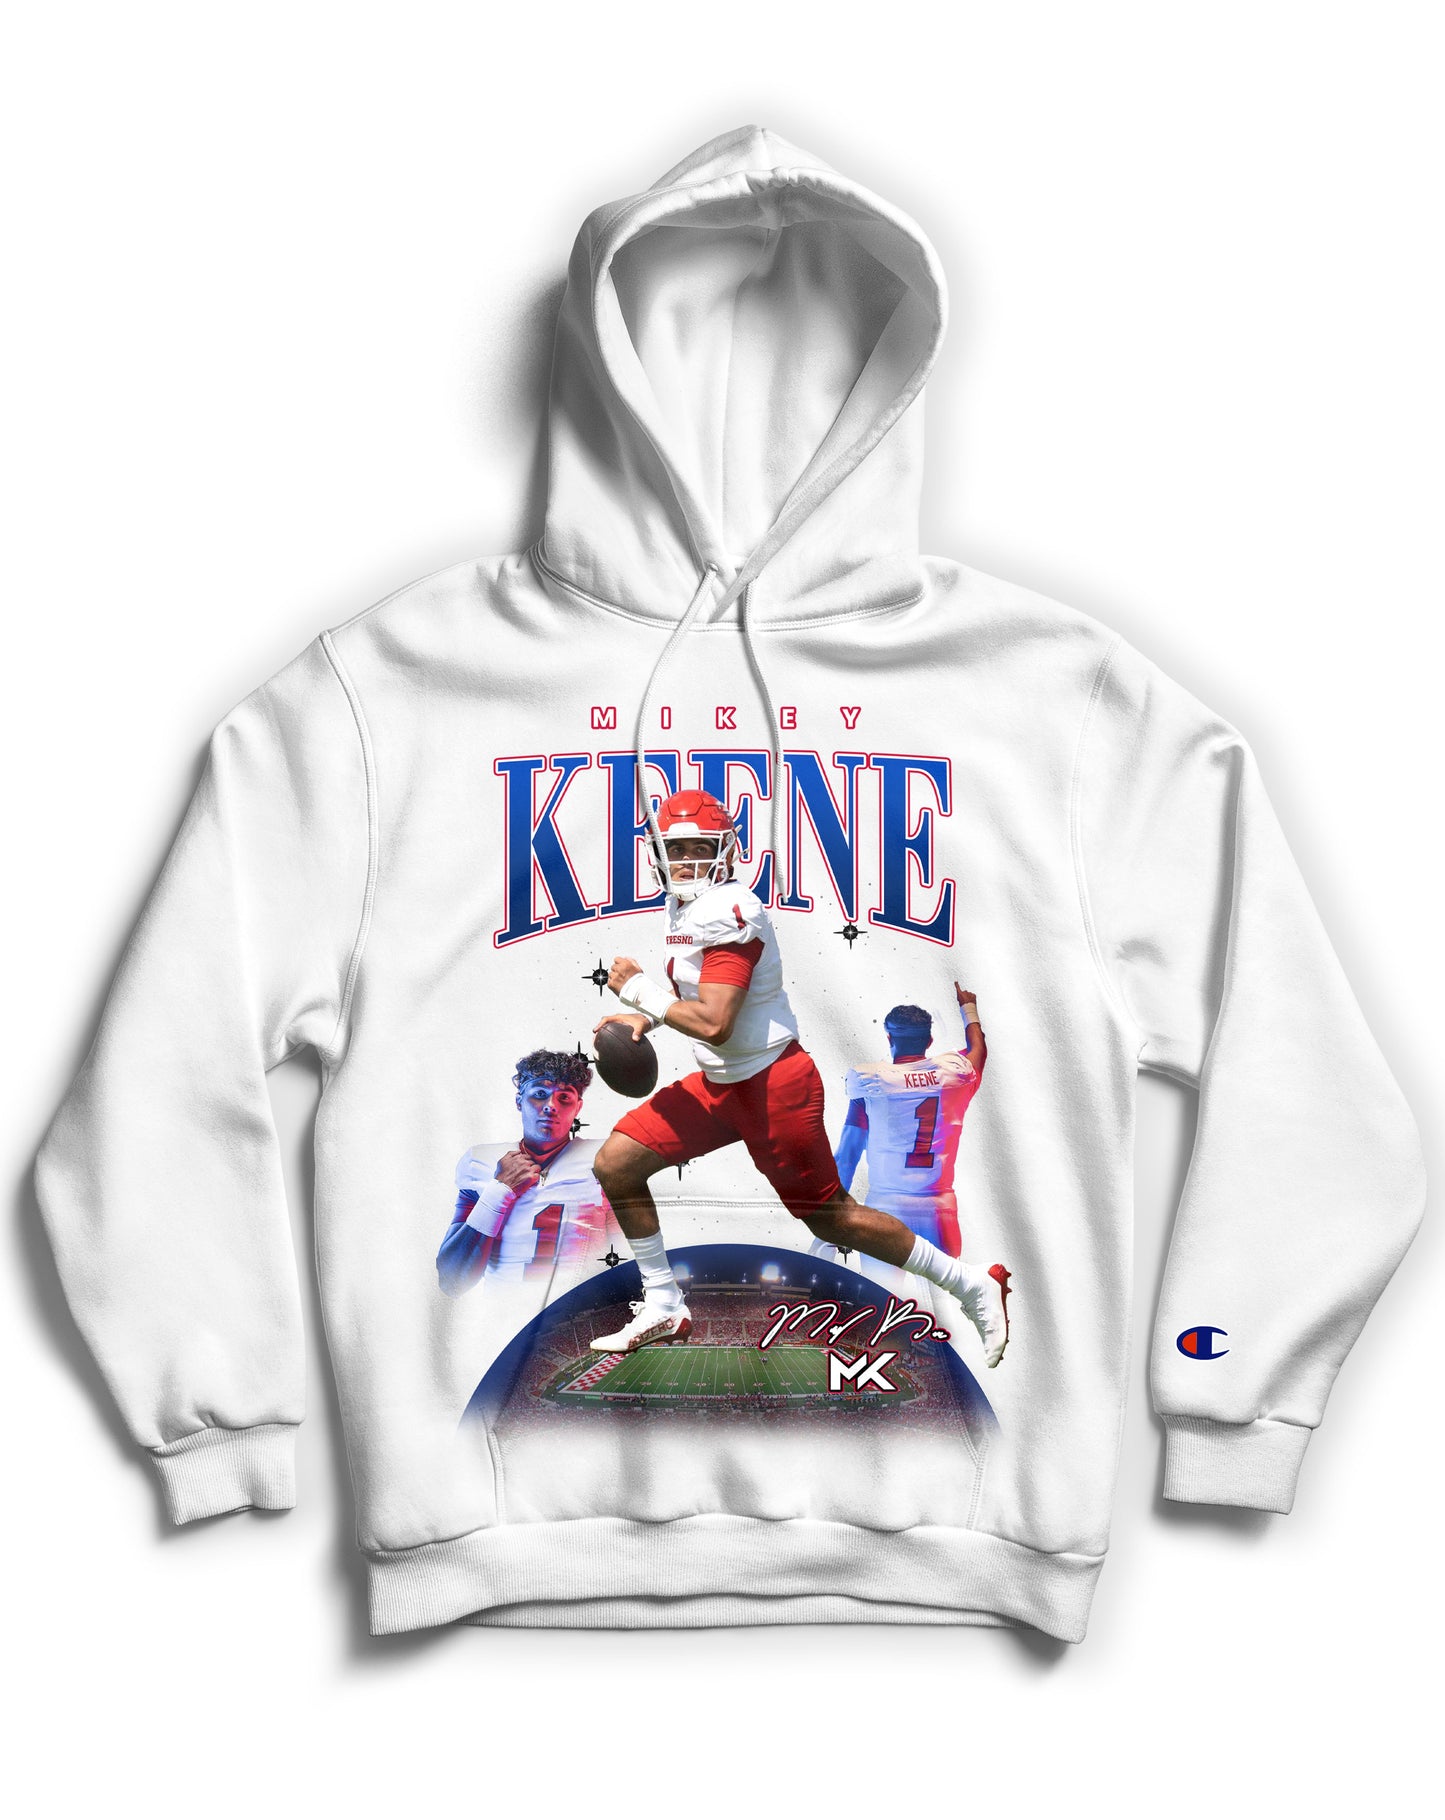 Mikey Keene "Universe" Tribute Hoodie *LIMITED EDITION* (Black & White)